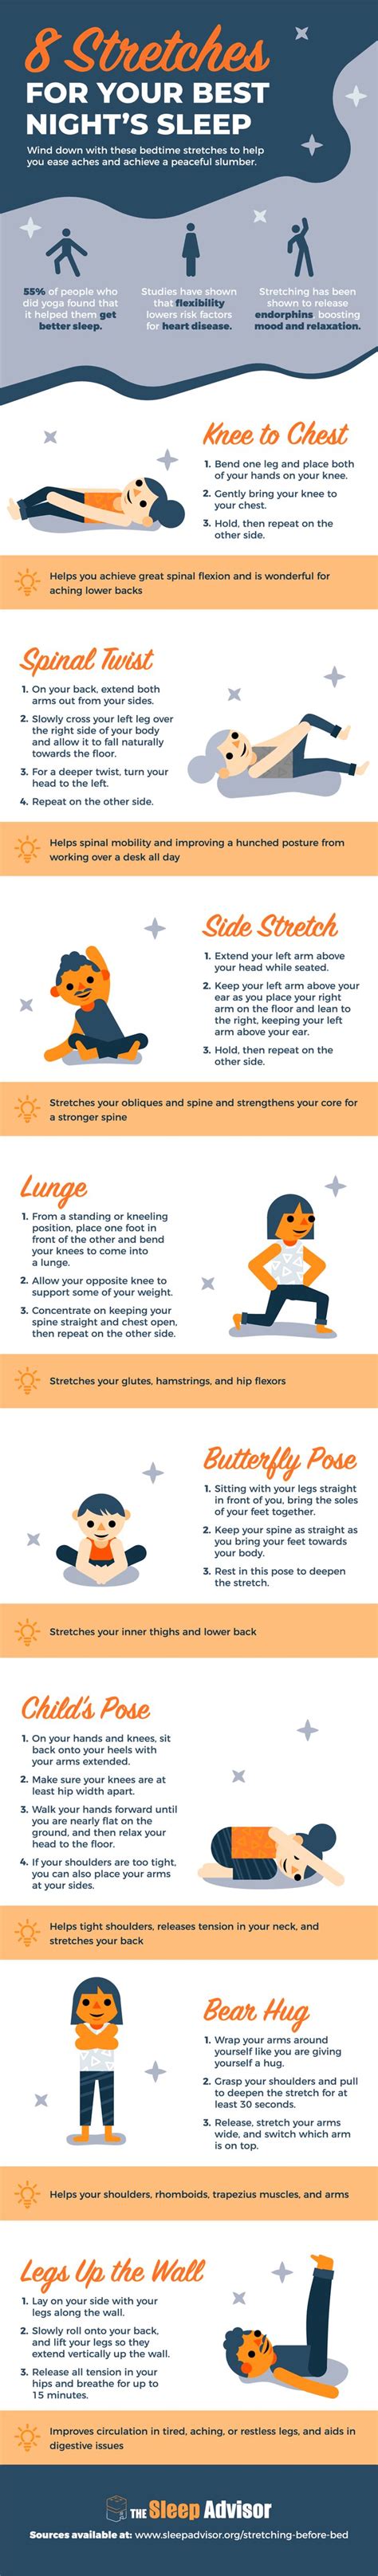 8 Stretches For Your Best Nights Sleep Sleep Advisor Stretches